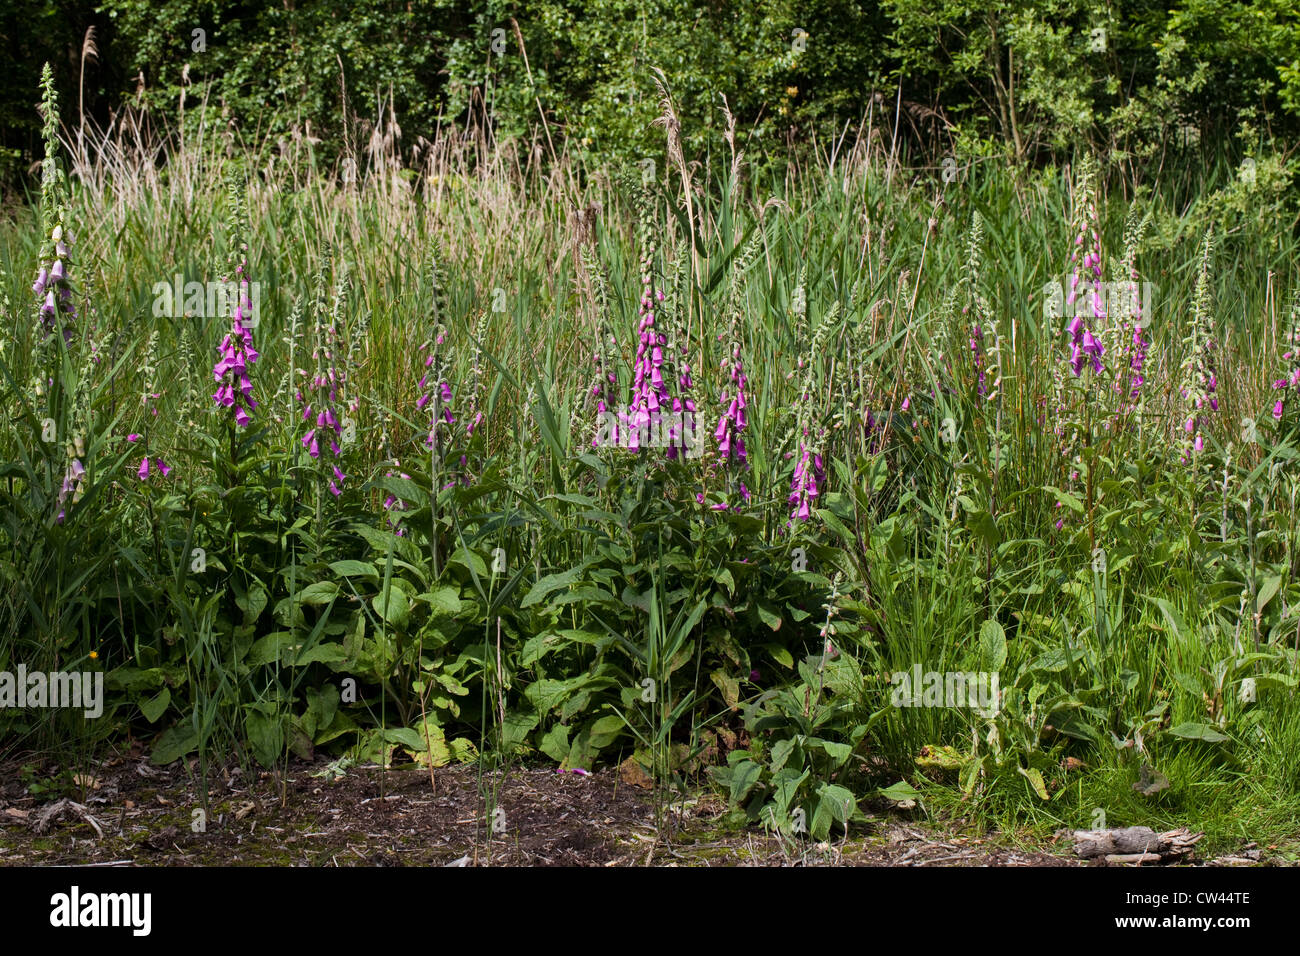 Foxgloves (Digitalis purpurea). Growing from previous years dispersed seeds atop recently dredged mud from a dyke bottom. Stock Photo